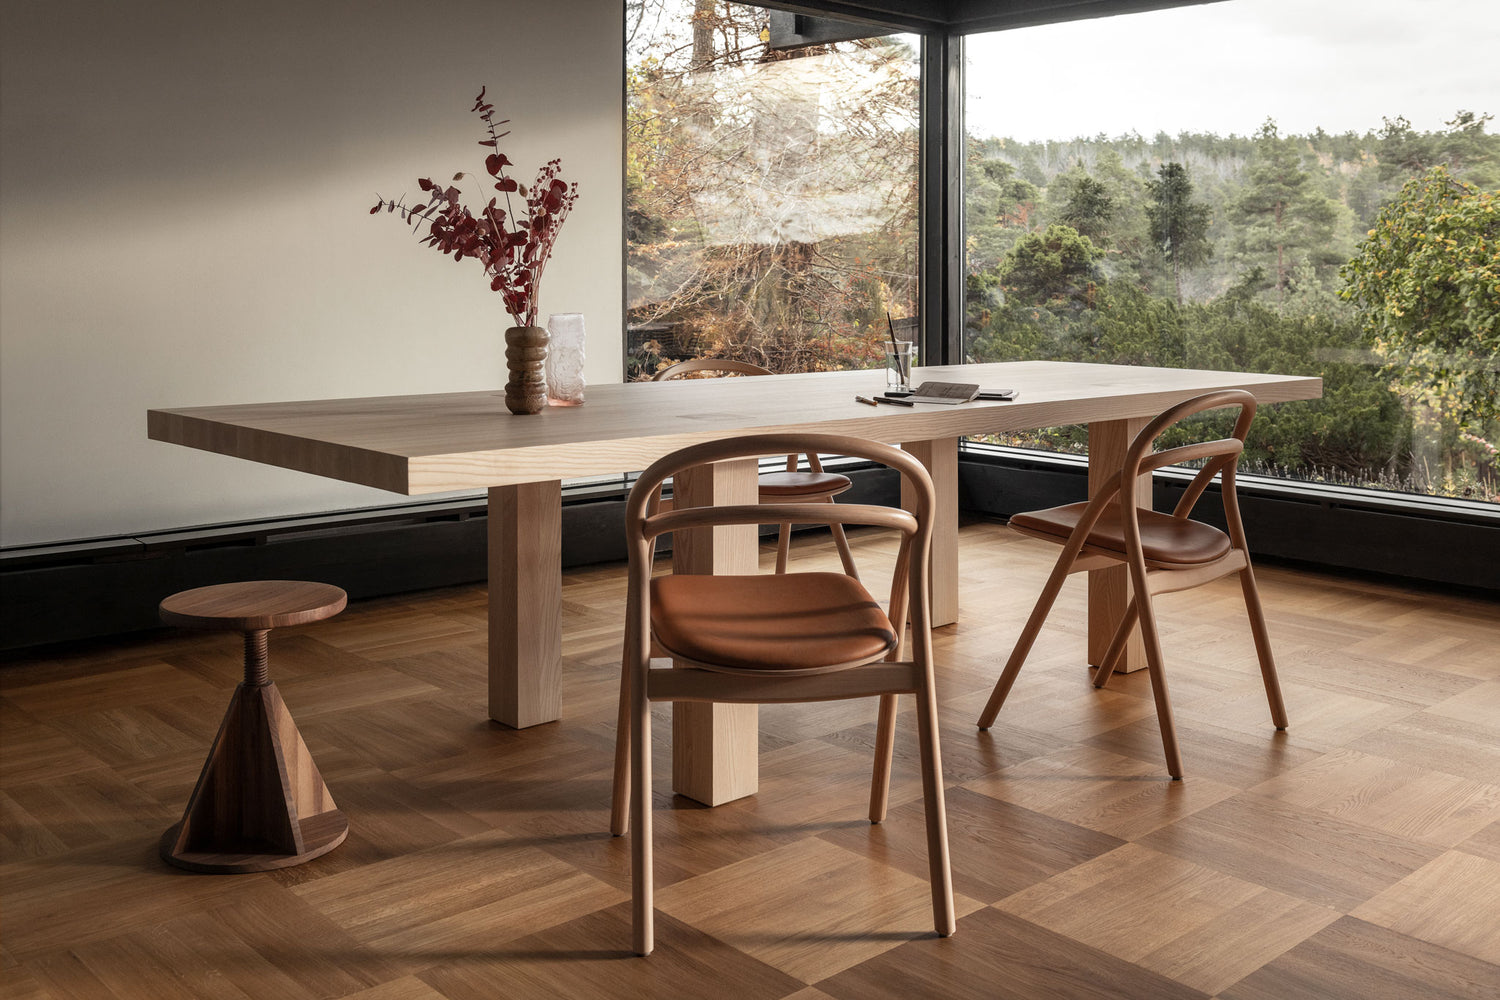 A dining room scene featuring Max Table, All Wood Stool Rocket in Walnut, and 2 Udon Upholstered Chairs in Natural / Cognac Leather.